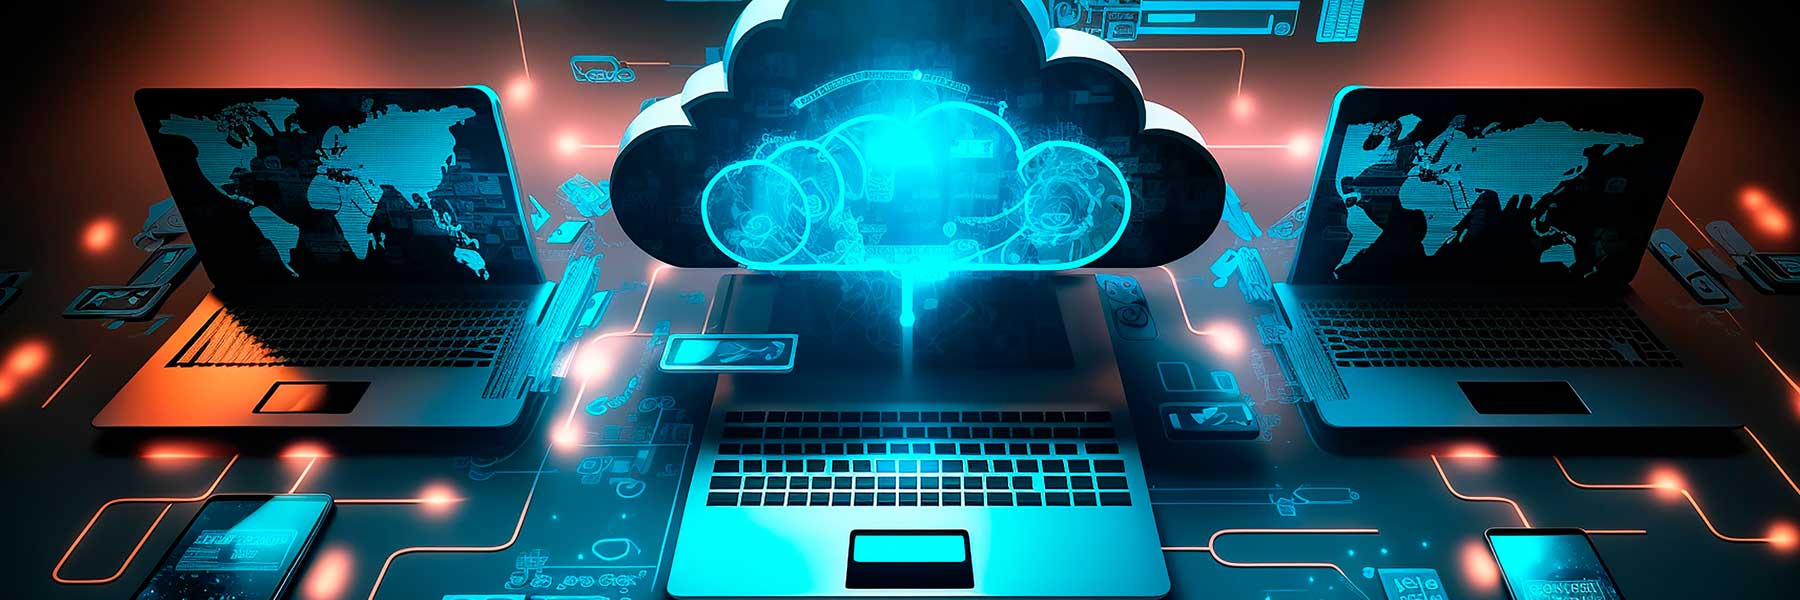 Abstract image of laptop and the cloud